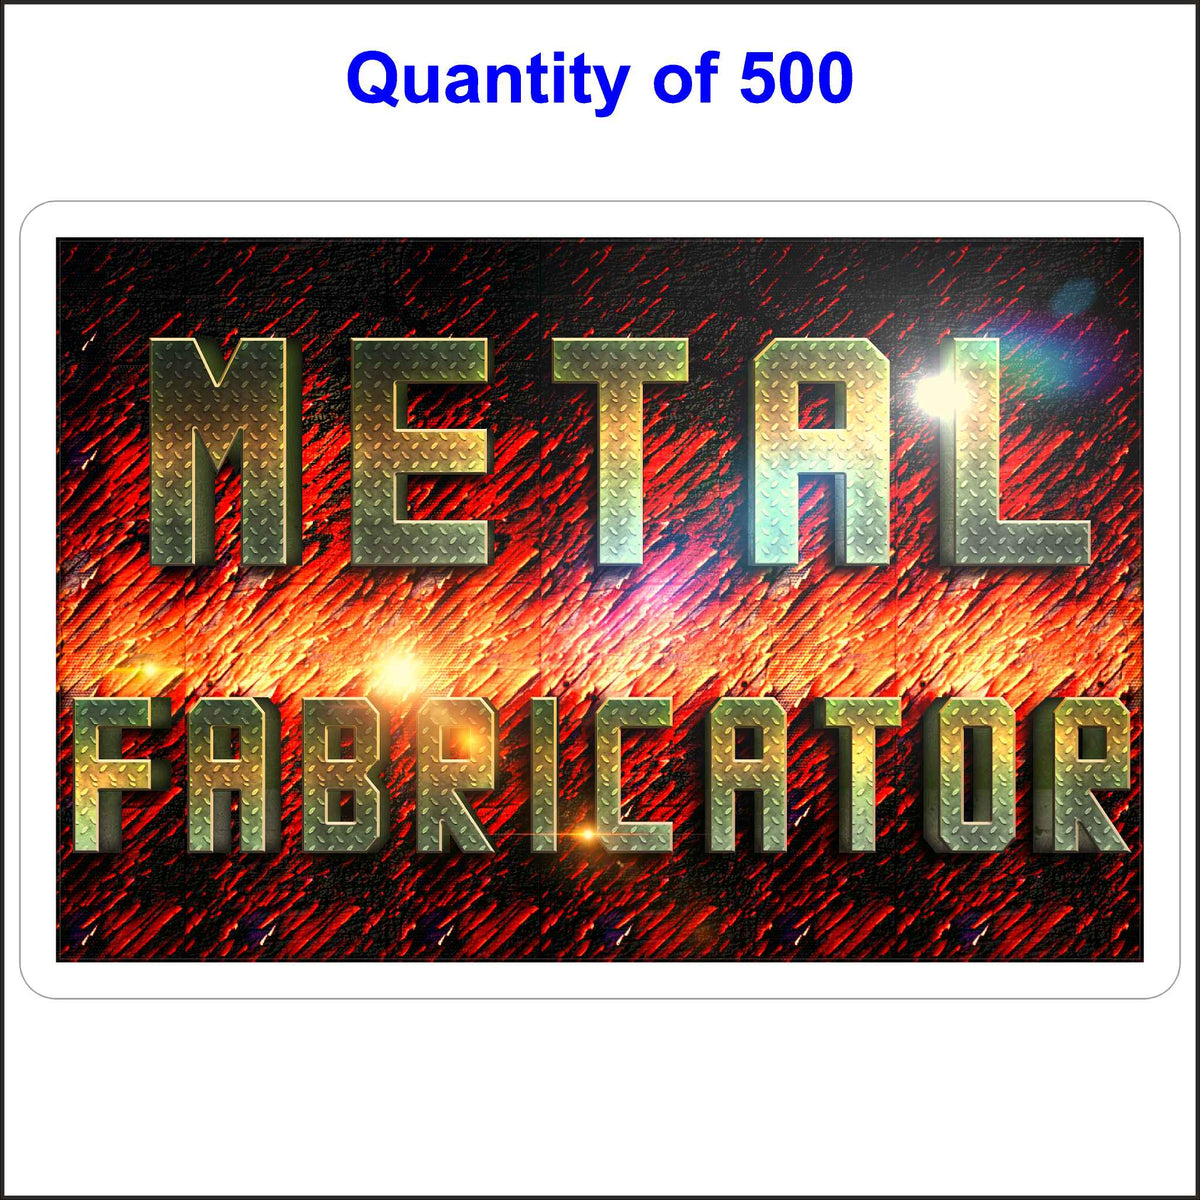 500 Quantity of This Metal Fabricator Sticker. Printed in Full Color and Shows the Text on a Diamond Plate and the Background in Colorful Etched Metal.